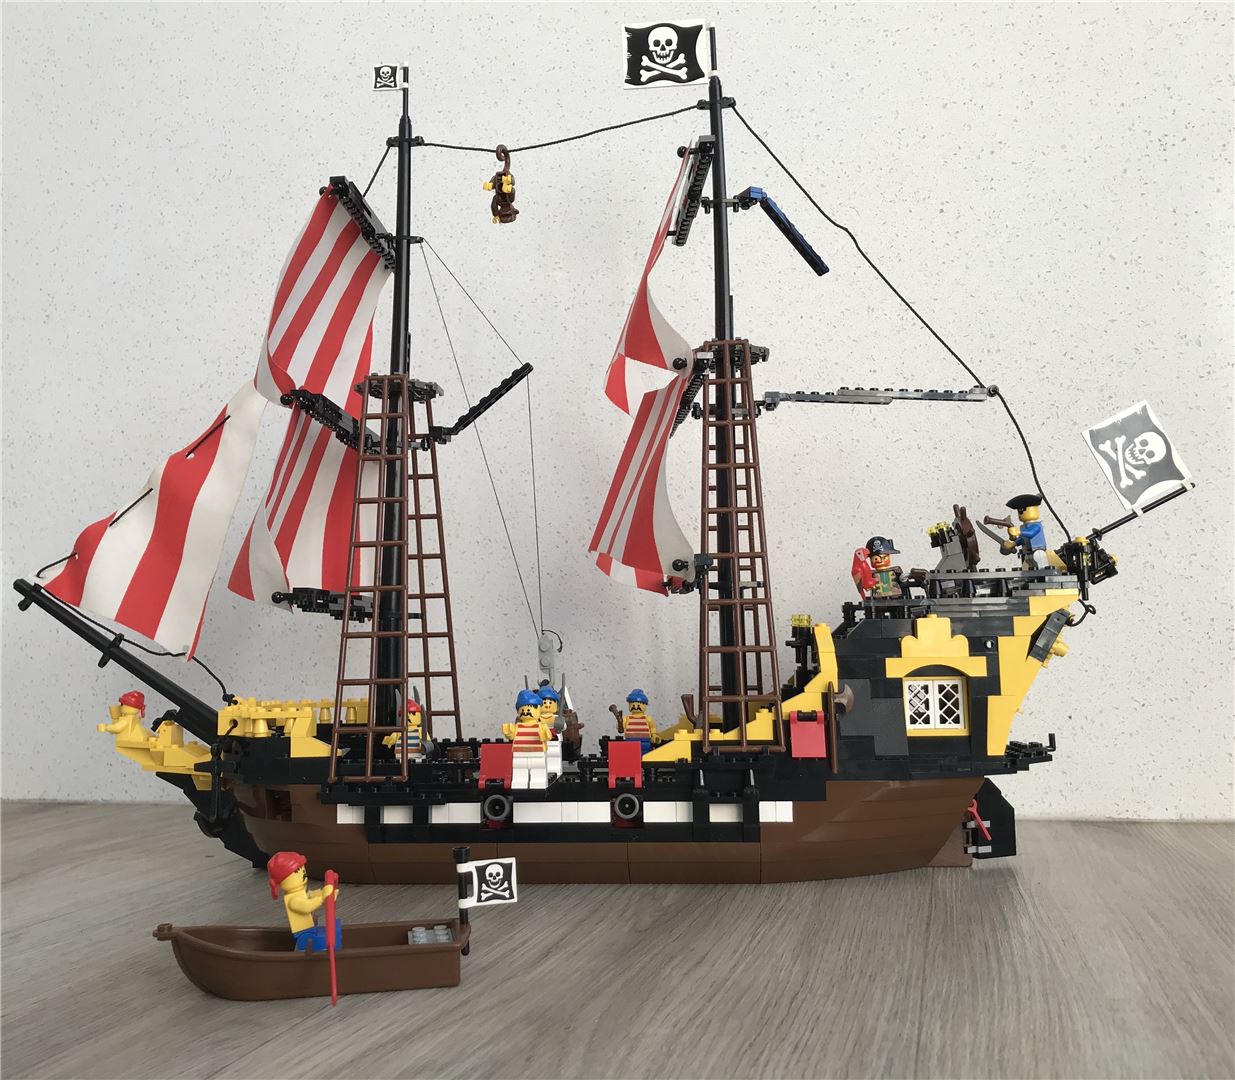 PilotBrick on Twitter: "Have you seen the Seas Barracuda (Lego 6285) in excellent condition? More about this offer on https://t.co/eiQfv1pL3h #legovintage #vintagelego #legopirates #legoblackseasbarracuda #lego6285 https://t.co/XflR6IvPRH" / Twitter